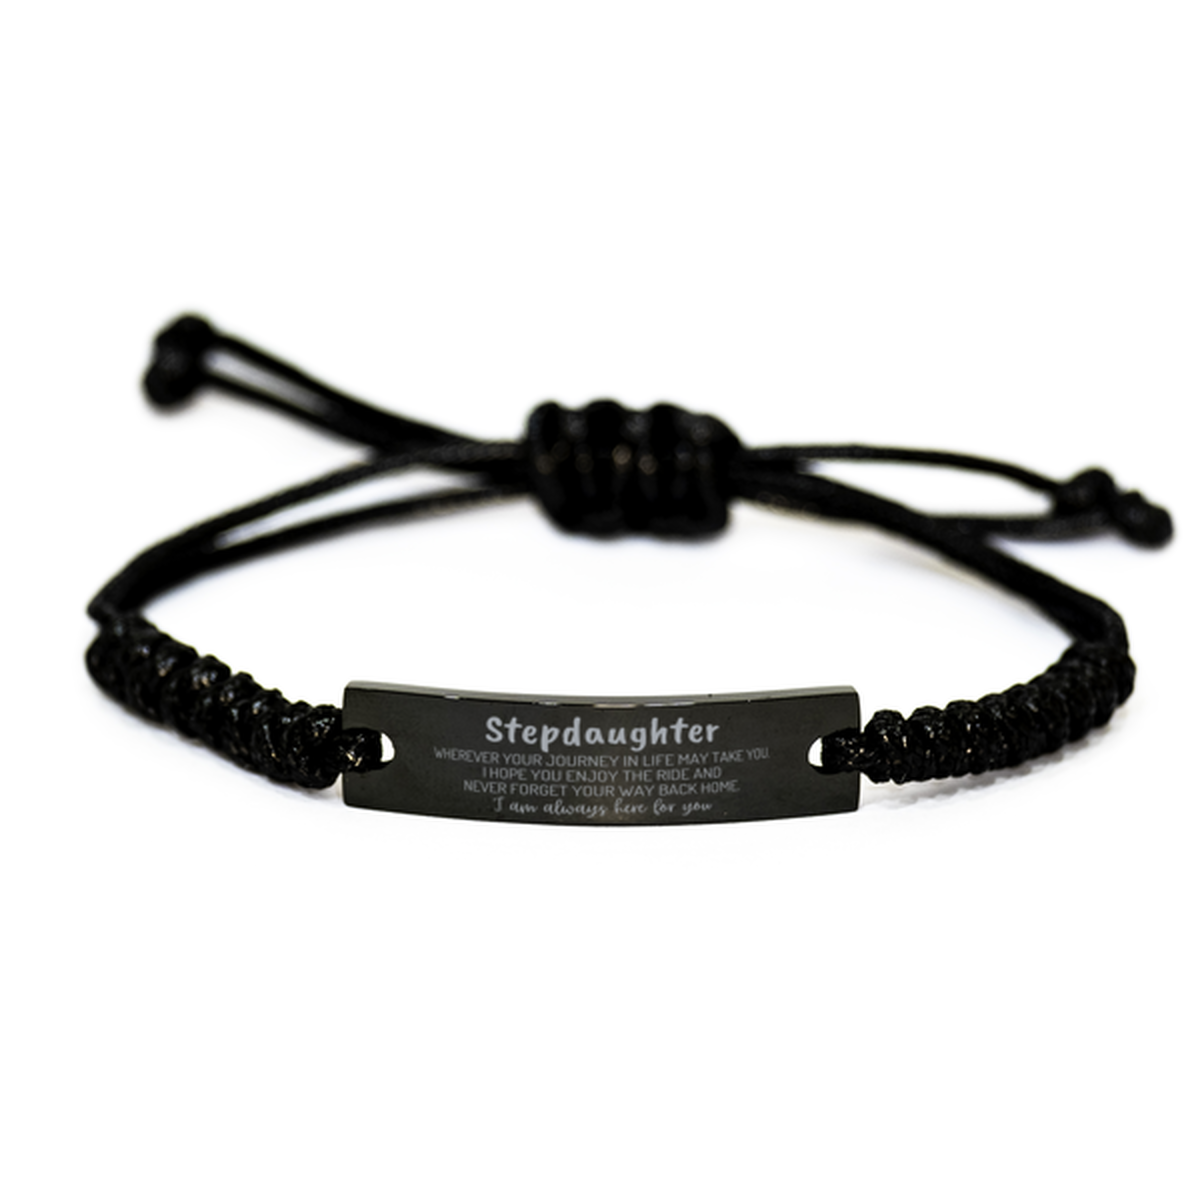 Stepdaughter wherever your journey in life may take you, I am always here for you Stepdaughter Black Rope Bracelet, Awesome Christmas Gifts For Stepdaughter, Stepdaughter Birthday Gifts for Men Women Family Loved One